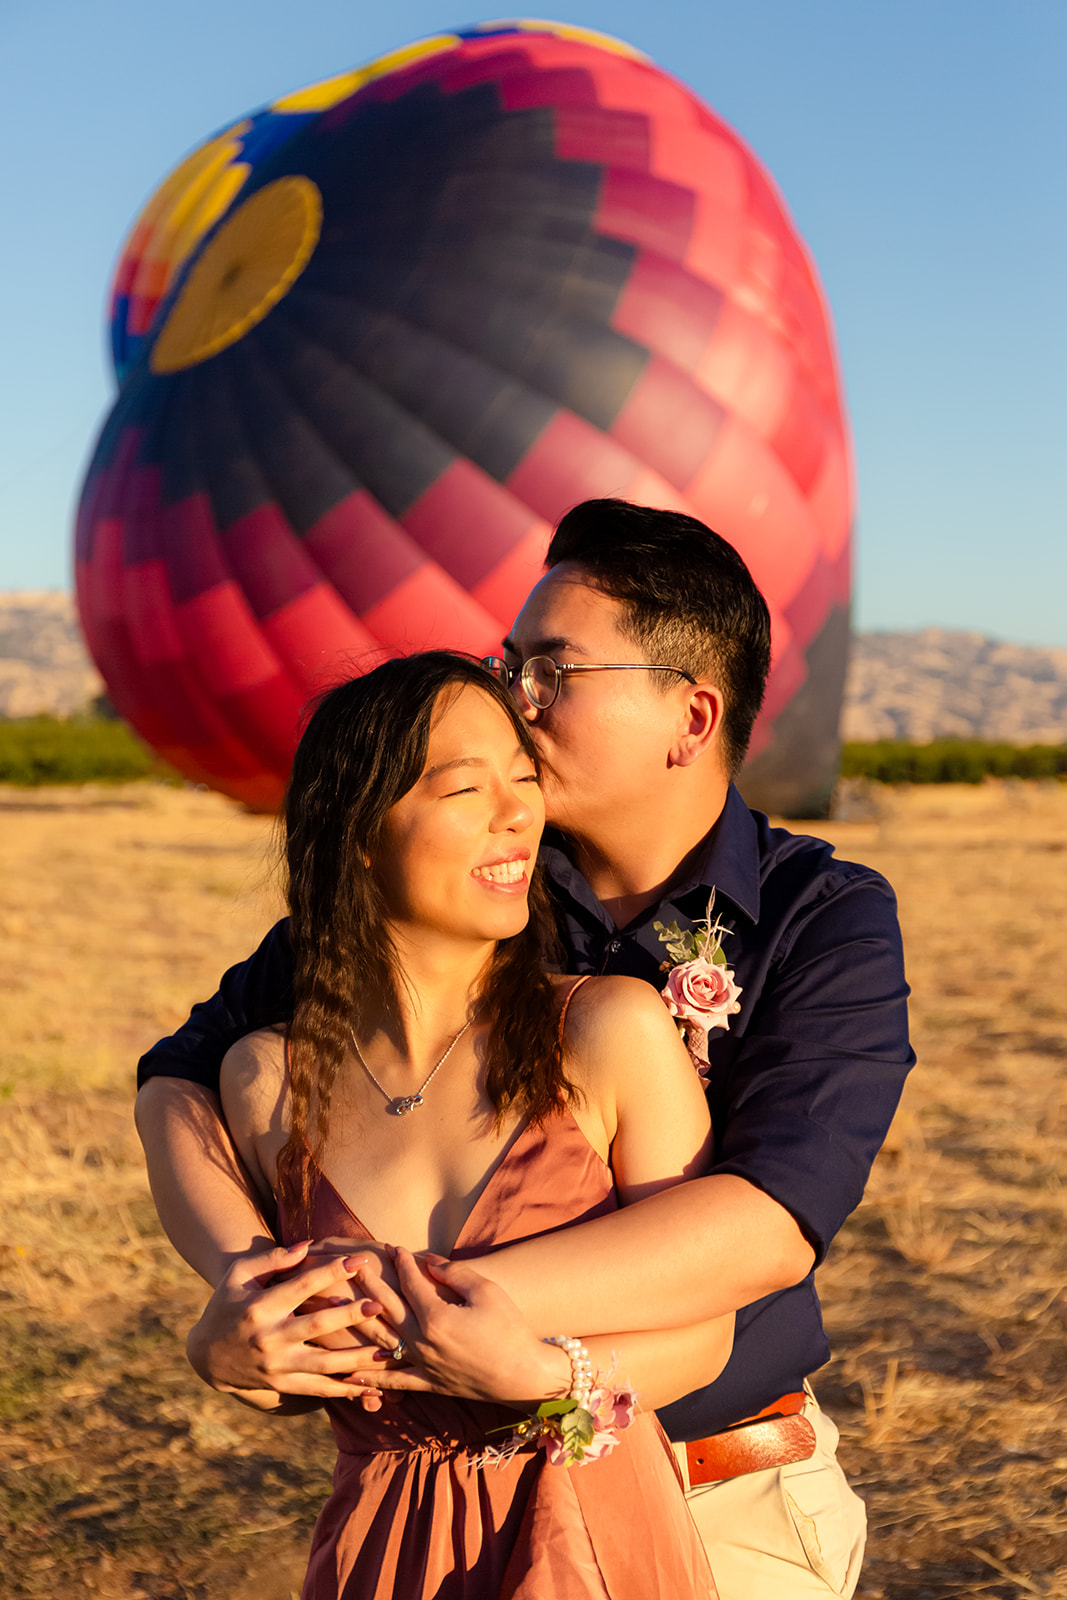 nonbinary person and their girlfriend embracing in front of colorful hot air balloons